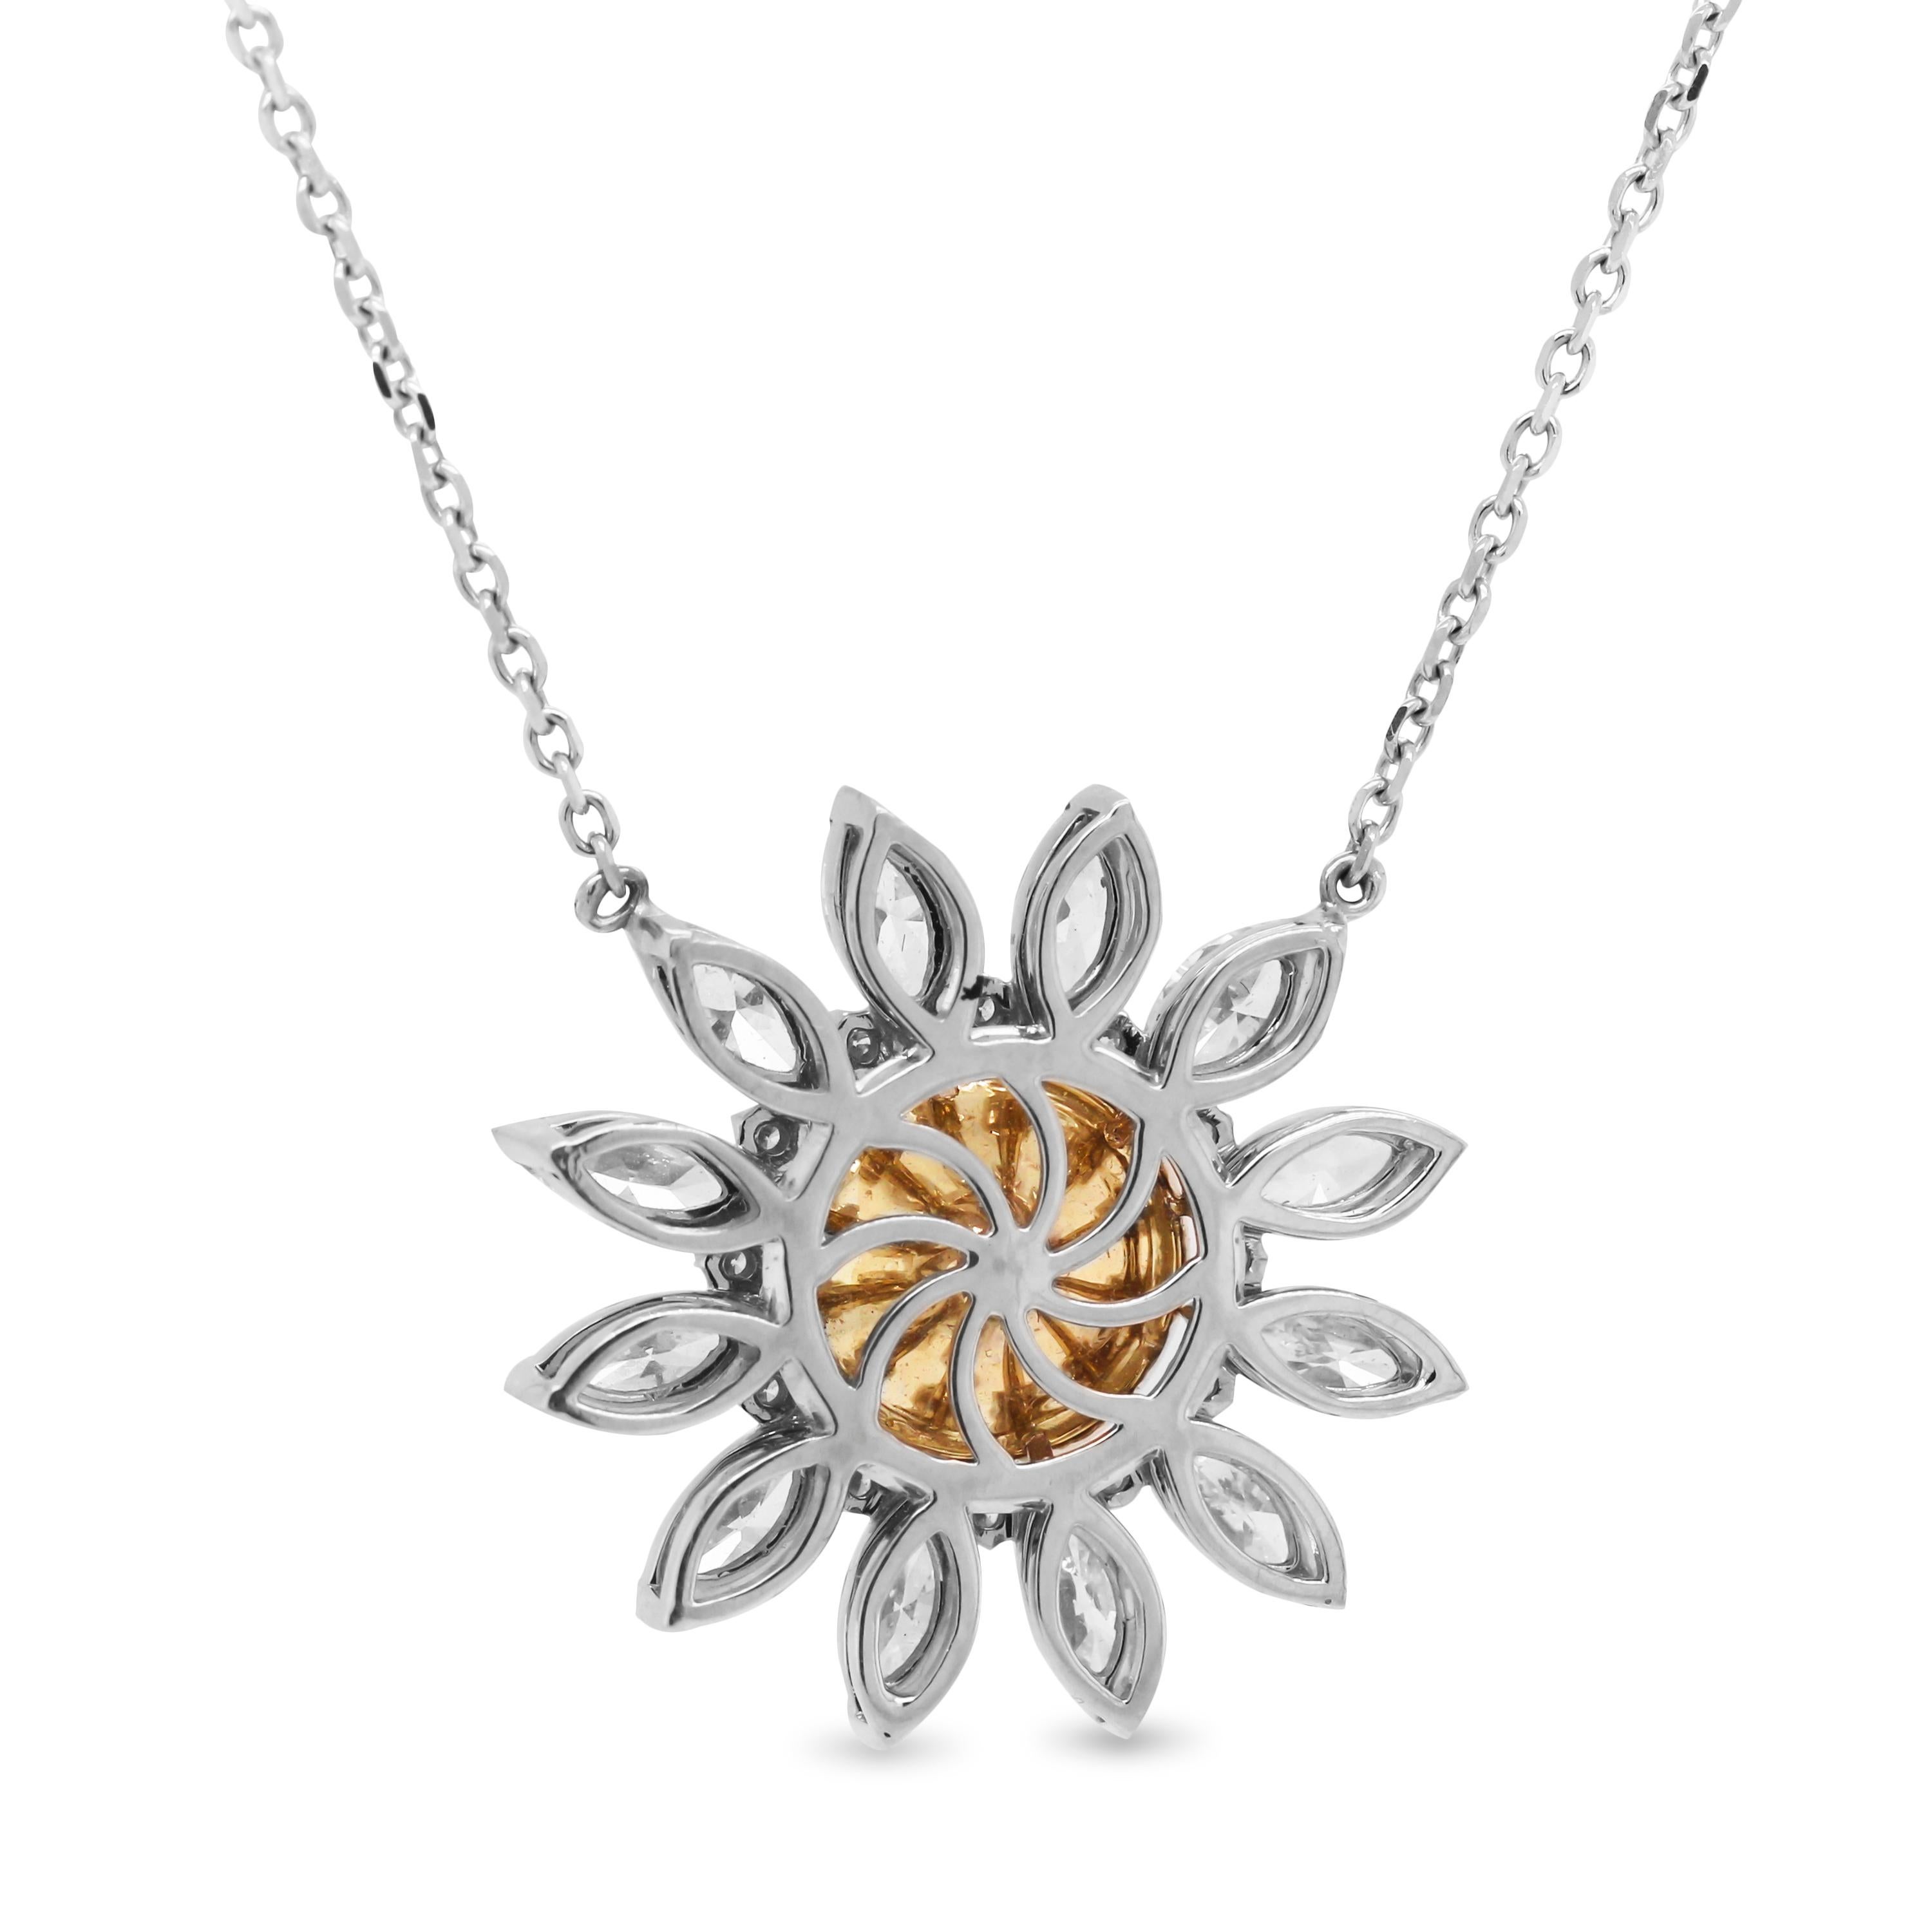 18K White Gold Starburst Floral Pendant Necklace with Round Yellow Diamond Center and Marquise White Diamonds

2.26 carat round Yellow Diamond center

2.40 carat carat apprx. G color, VS clarity marquise diamonds

Pendant is 1 inch in width. 

Chain